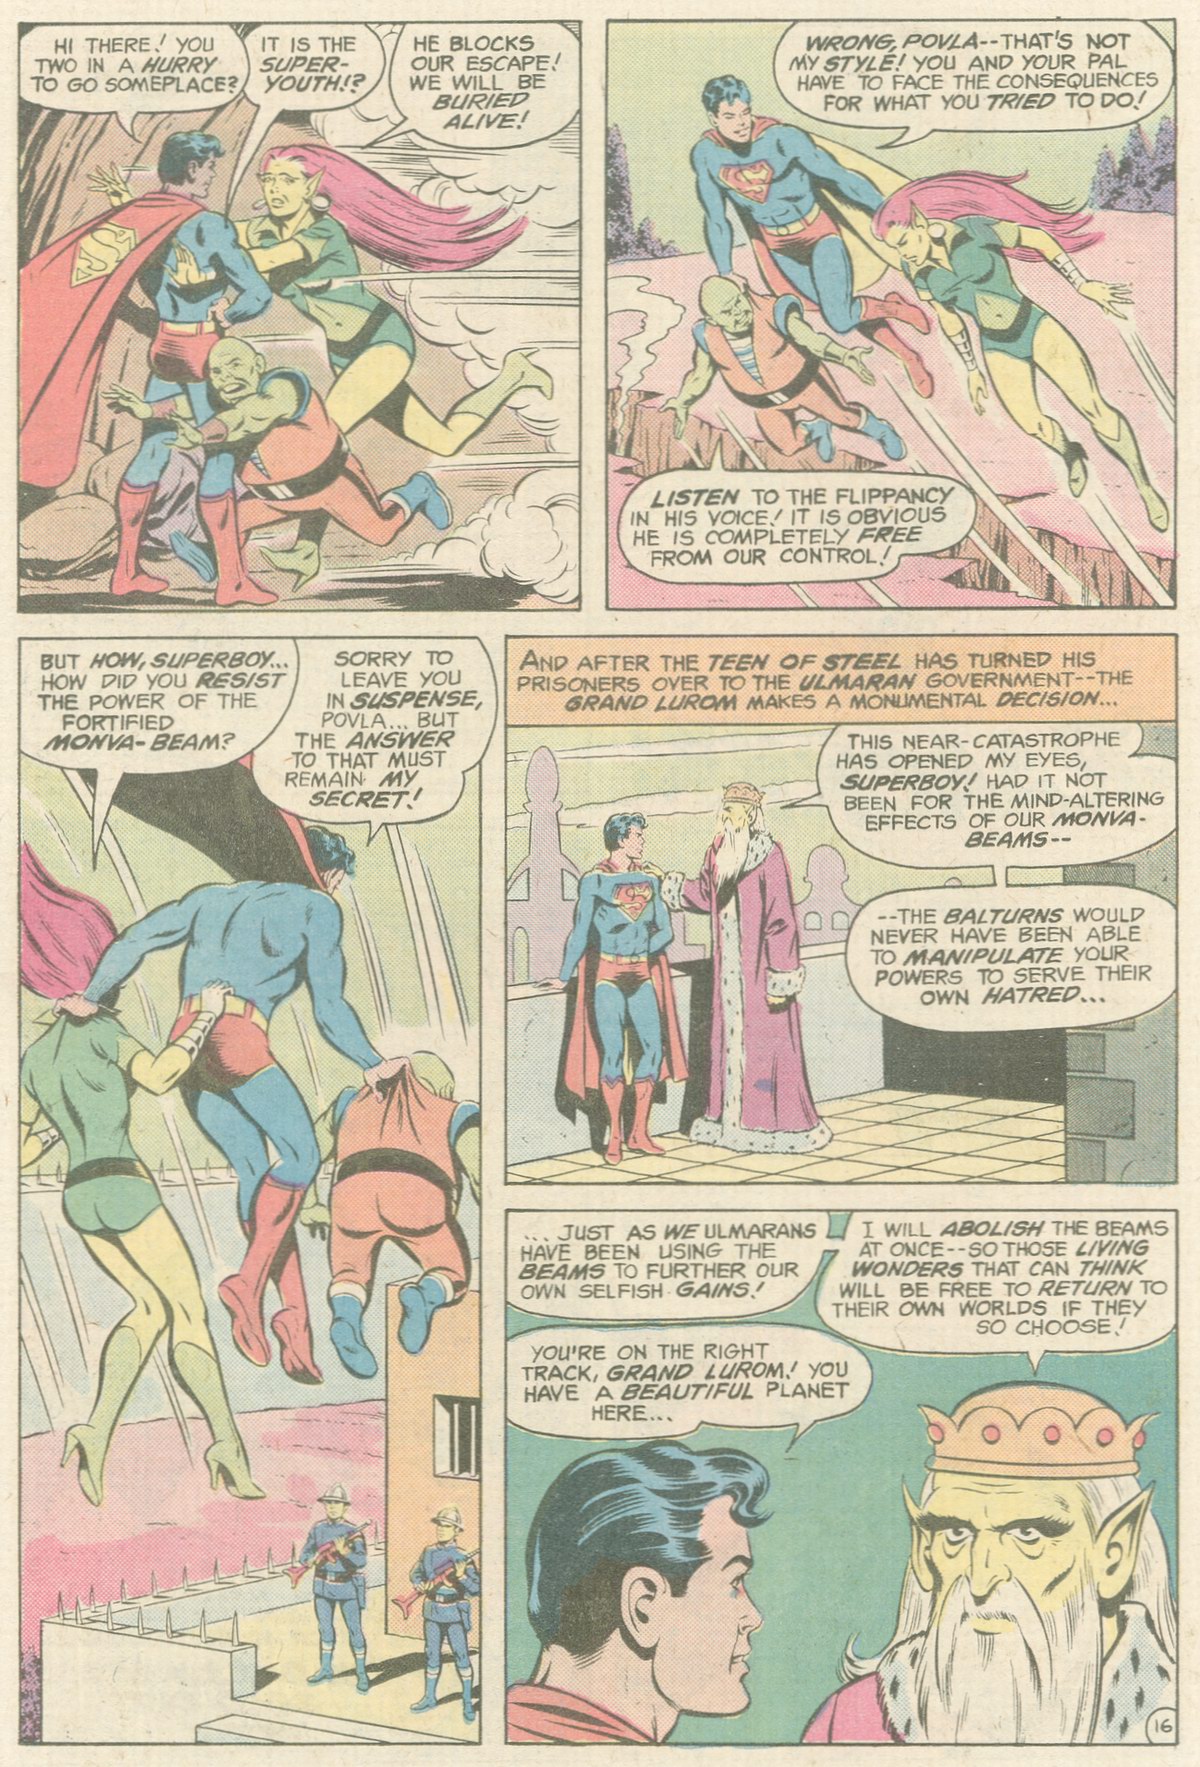 The New Adventures of Superboy 20 Page 16